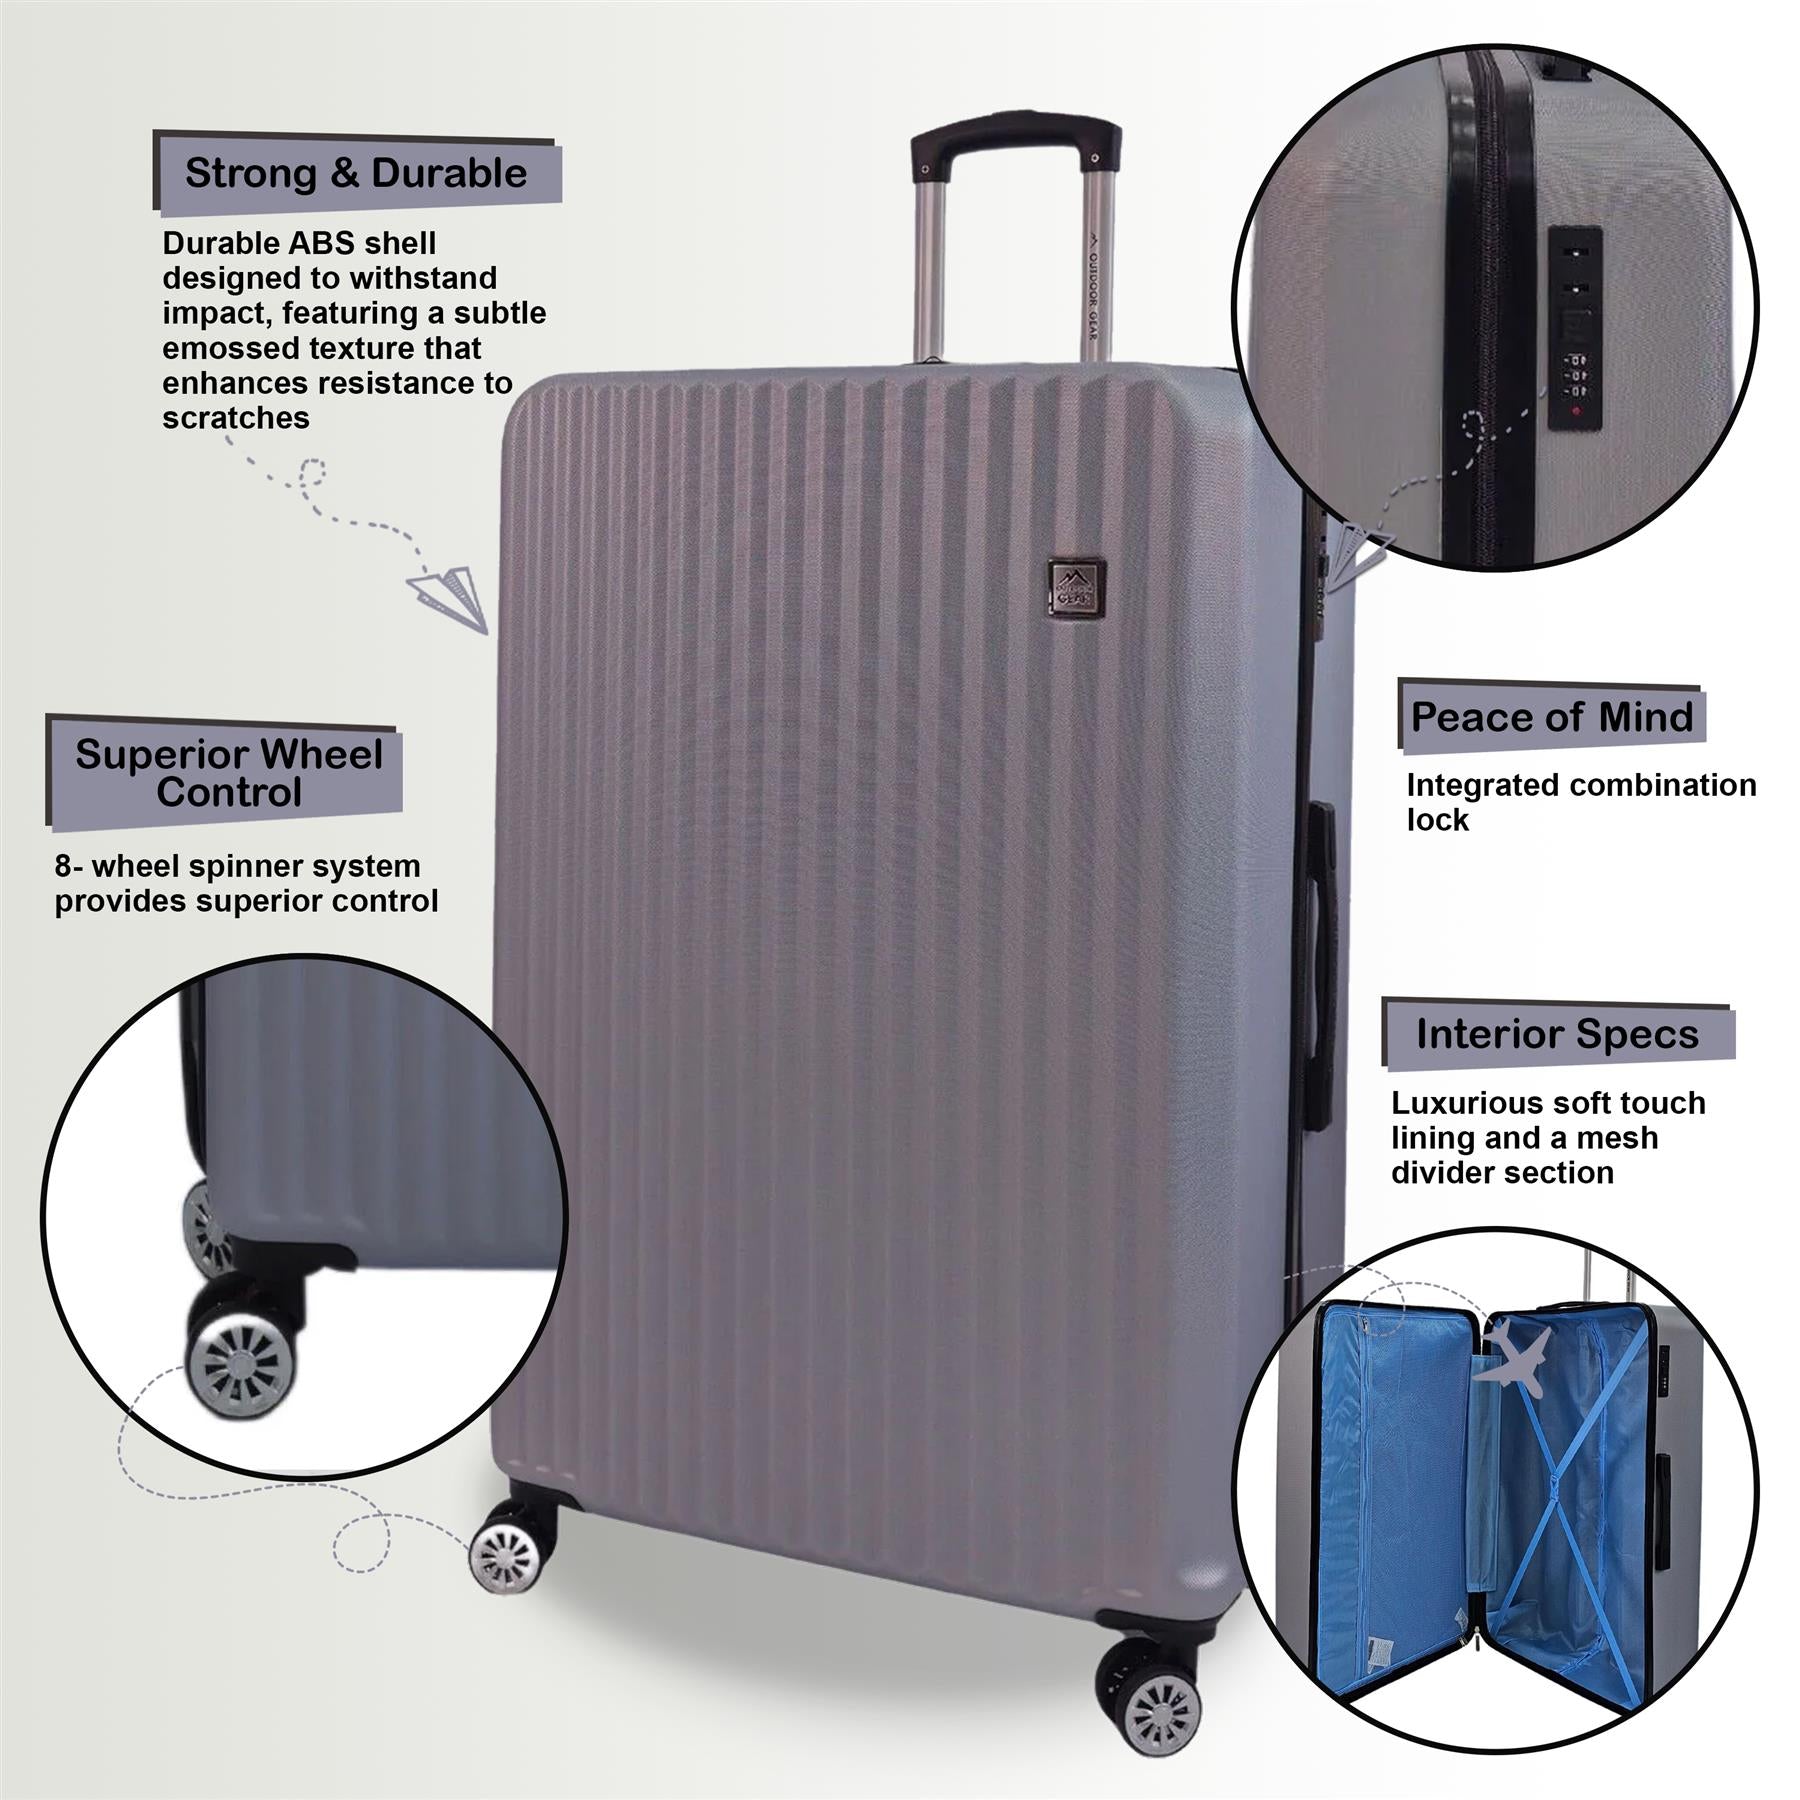 Albertville Large Hard Shell Suitcase in Silver